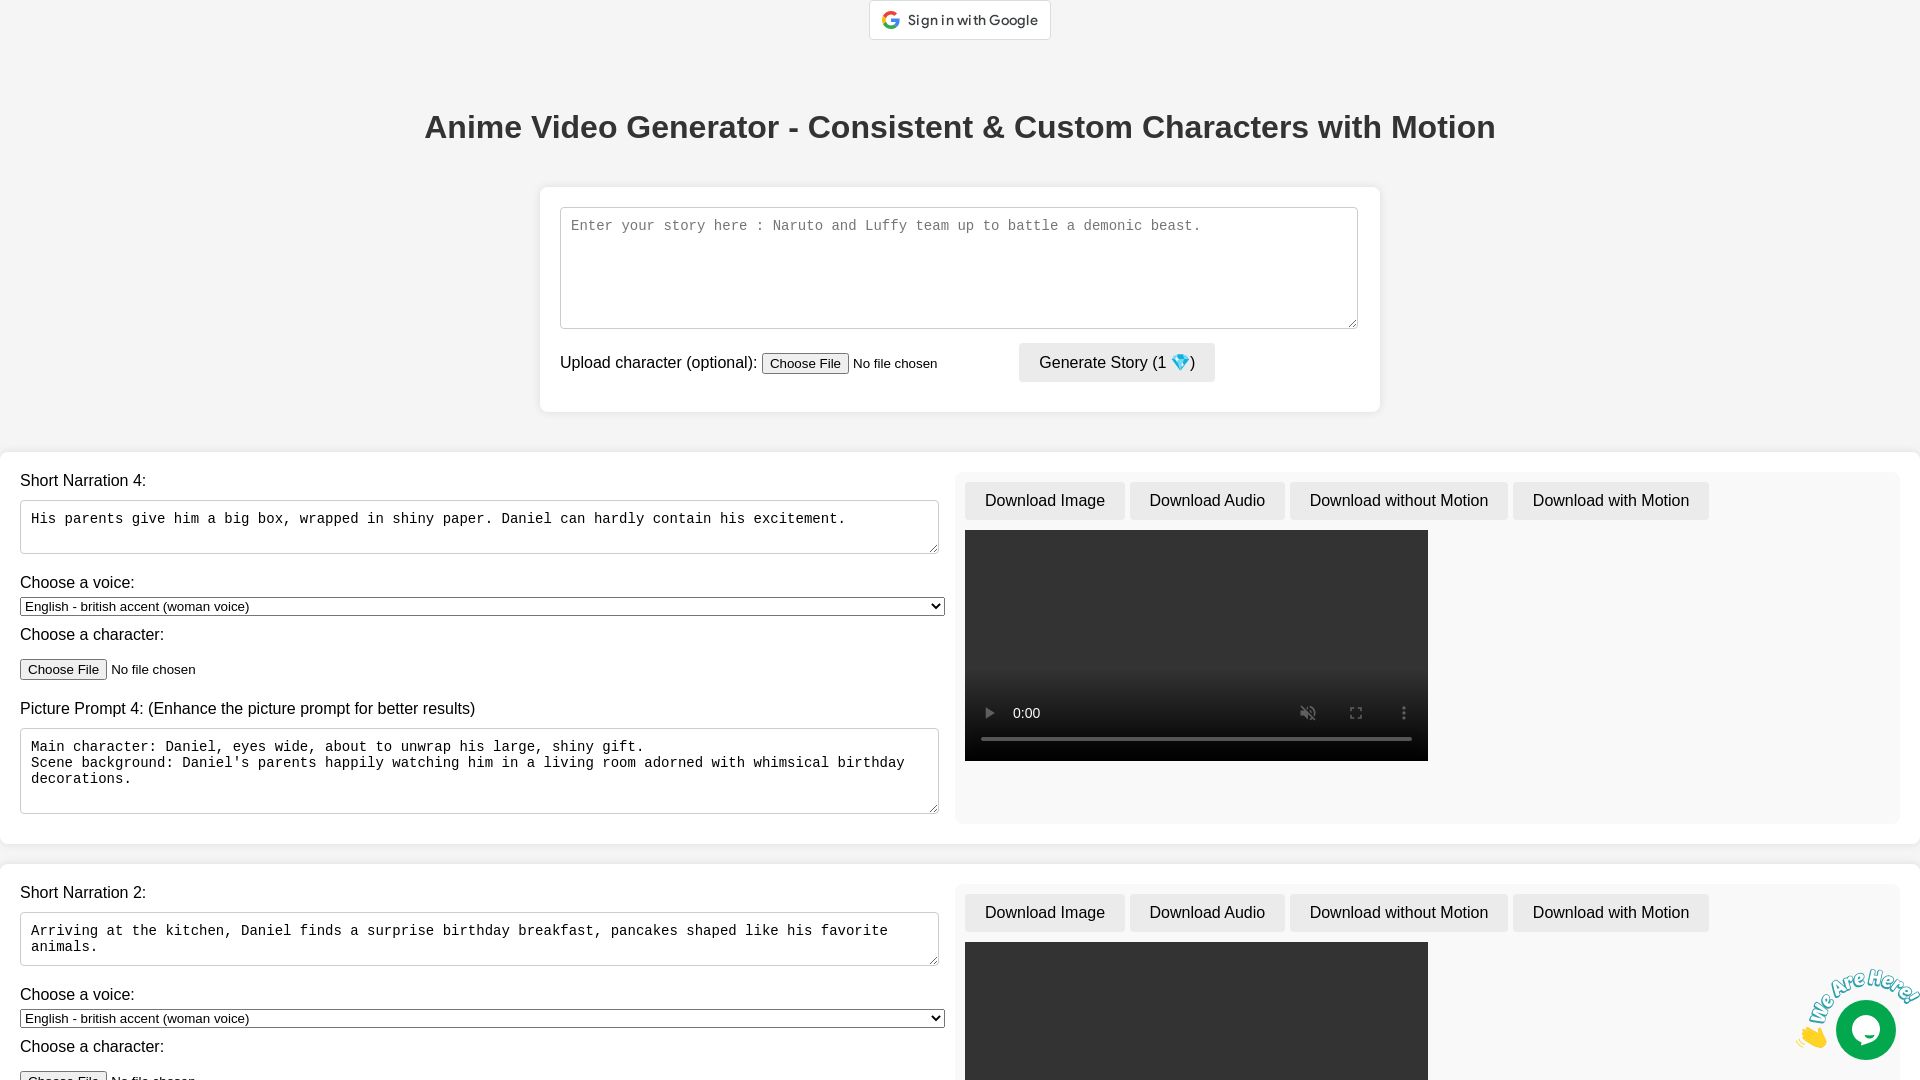 AI Story Generator for YouTube Shorts - Personalized Characters & Motion